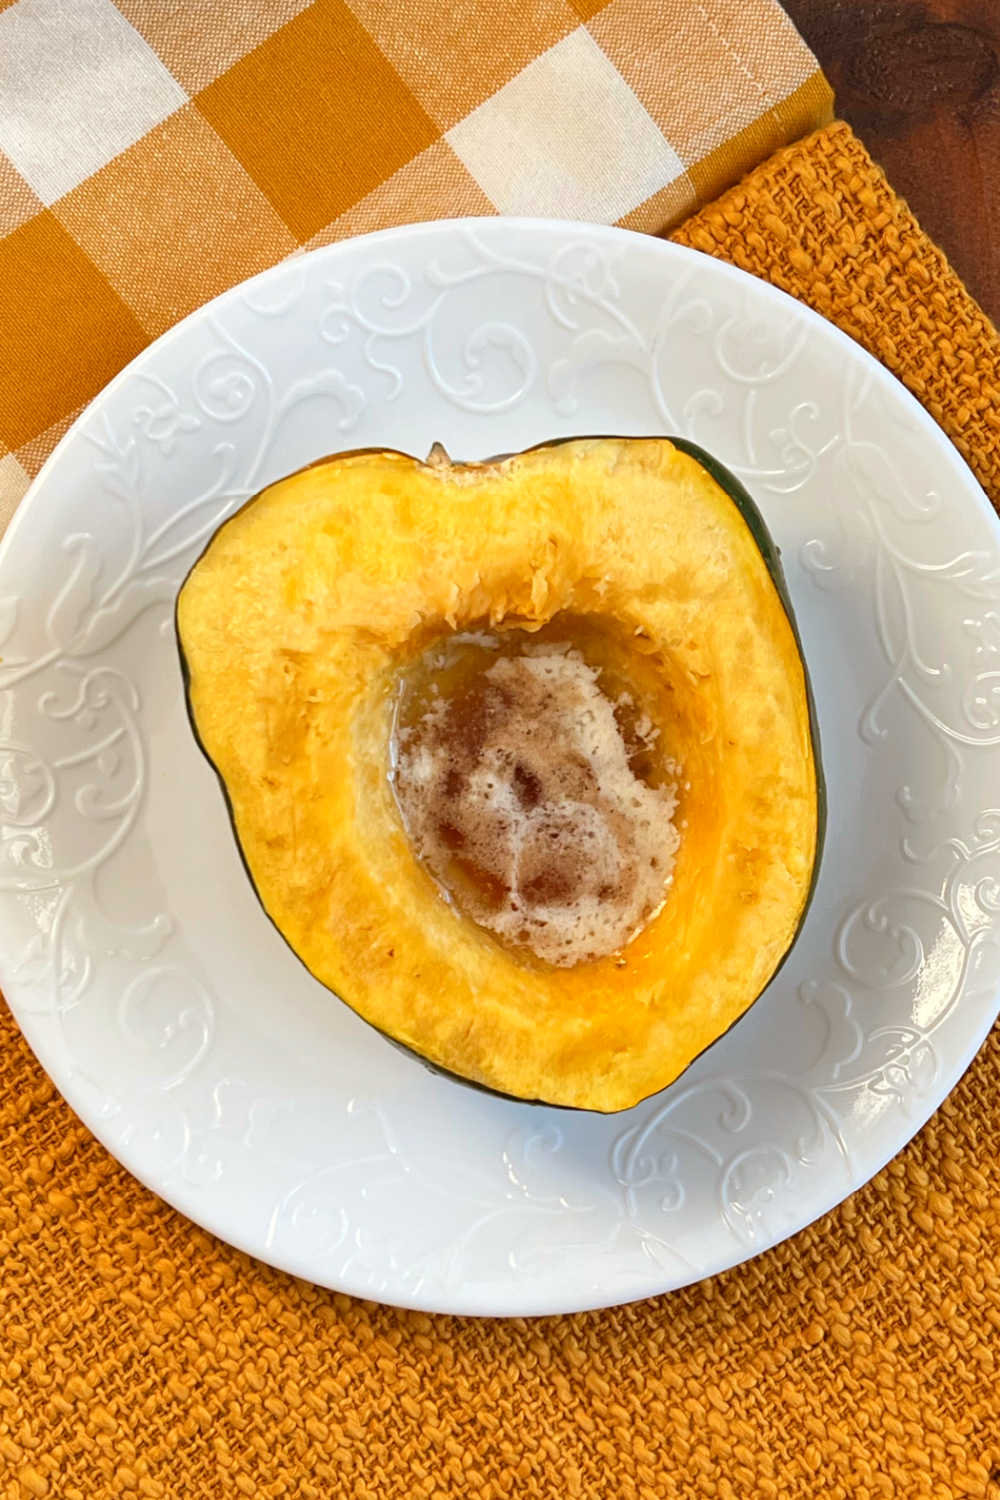 microwave acorn squash half with melted butter and brown sugar on plate.